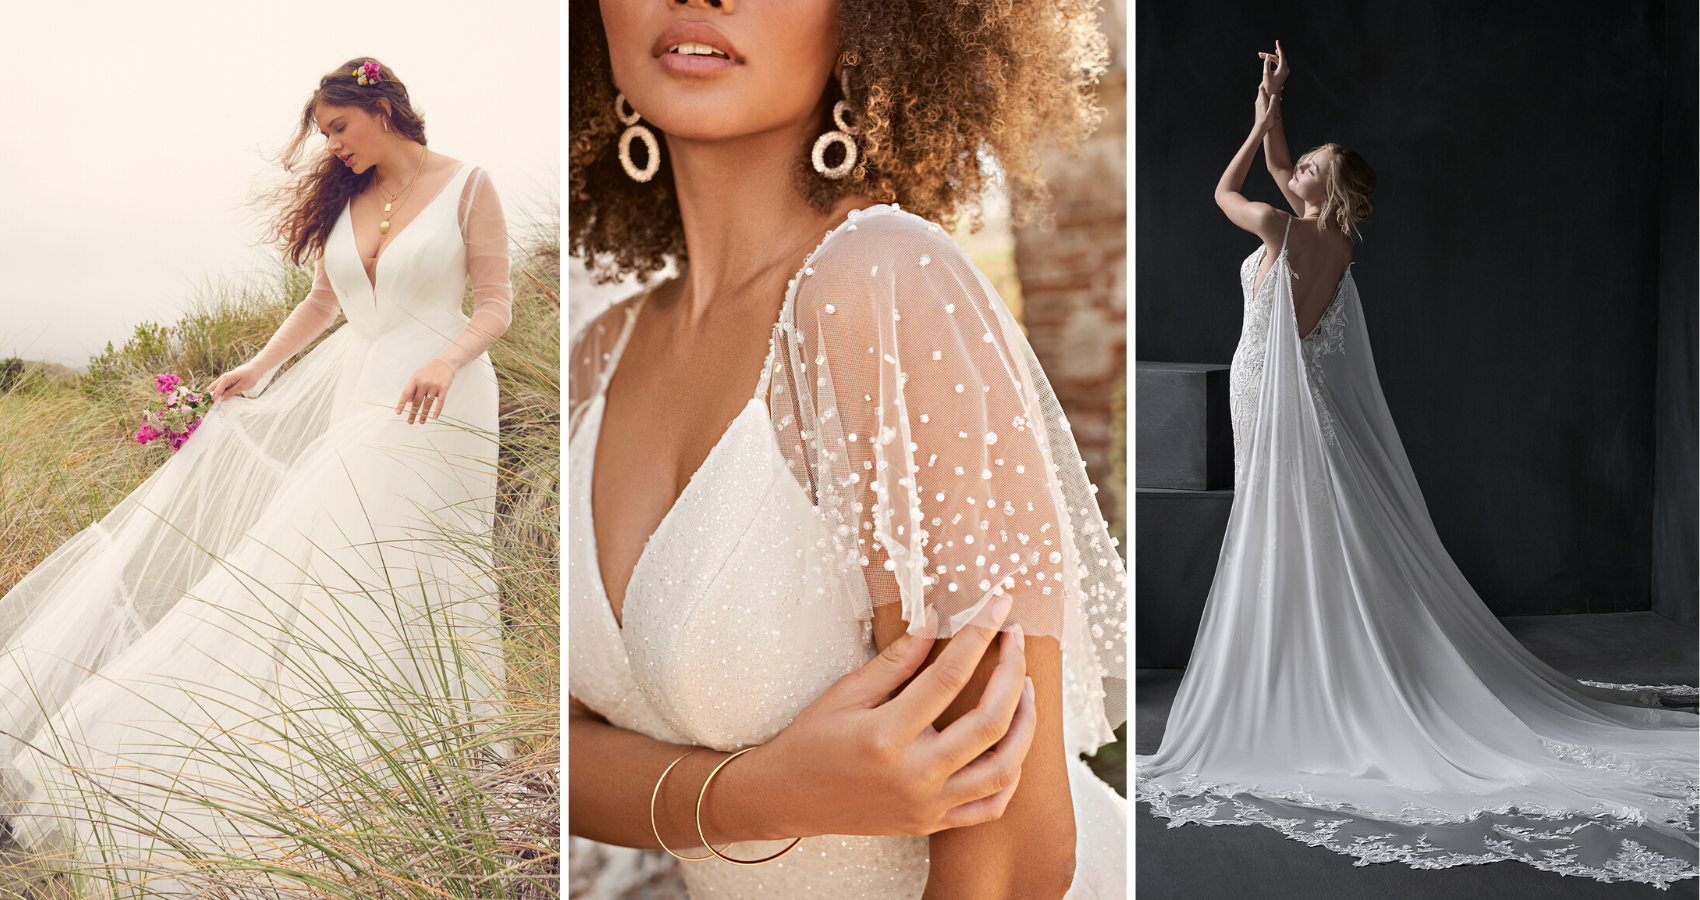 Brides In Bridal Cape And Jackets Called Lana by Rebecca Ingram, Sigourney By Maggie Sottero, And Liam By Sottero And Midgley